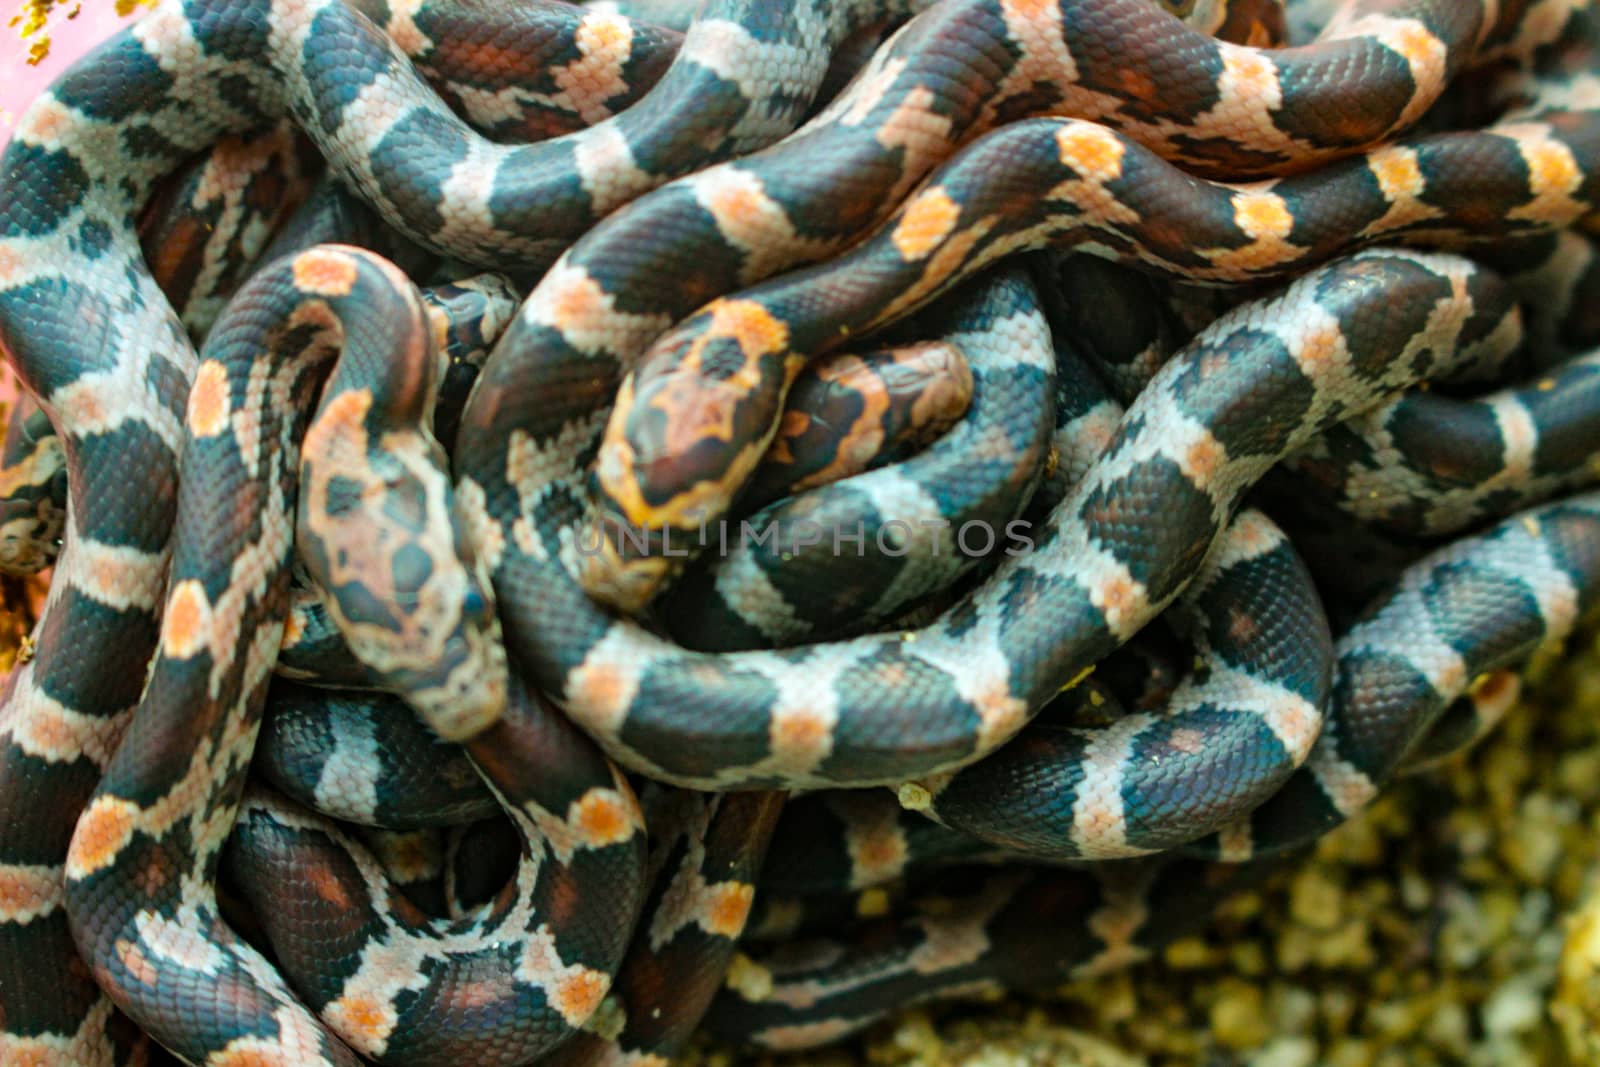 Pile of baby corn snakes that just hatched out of egg by mynewturtle1